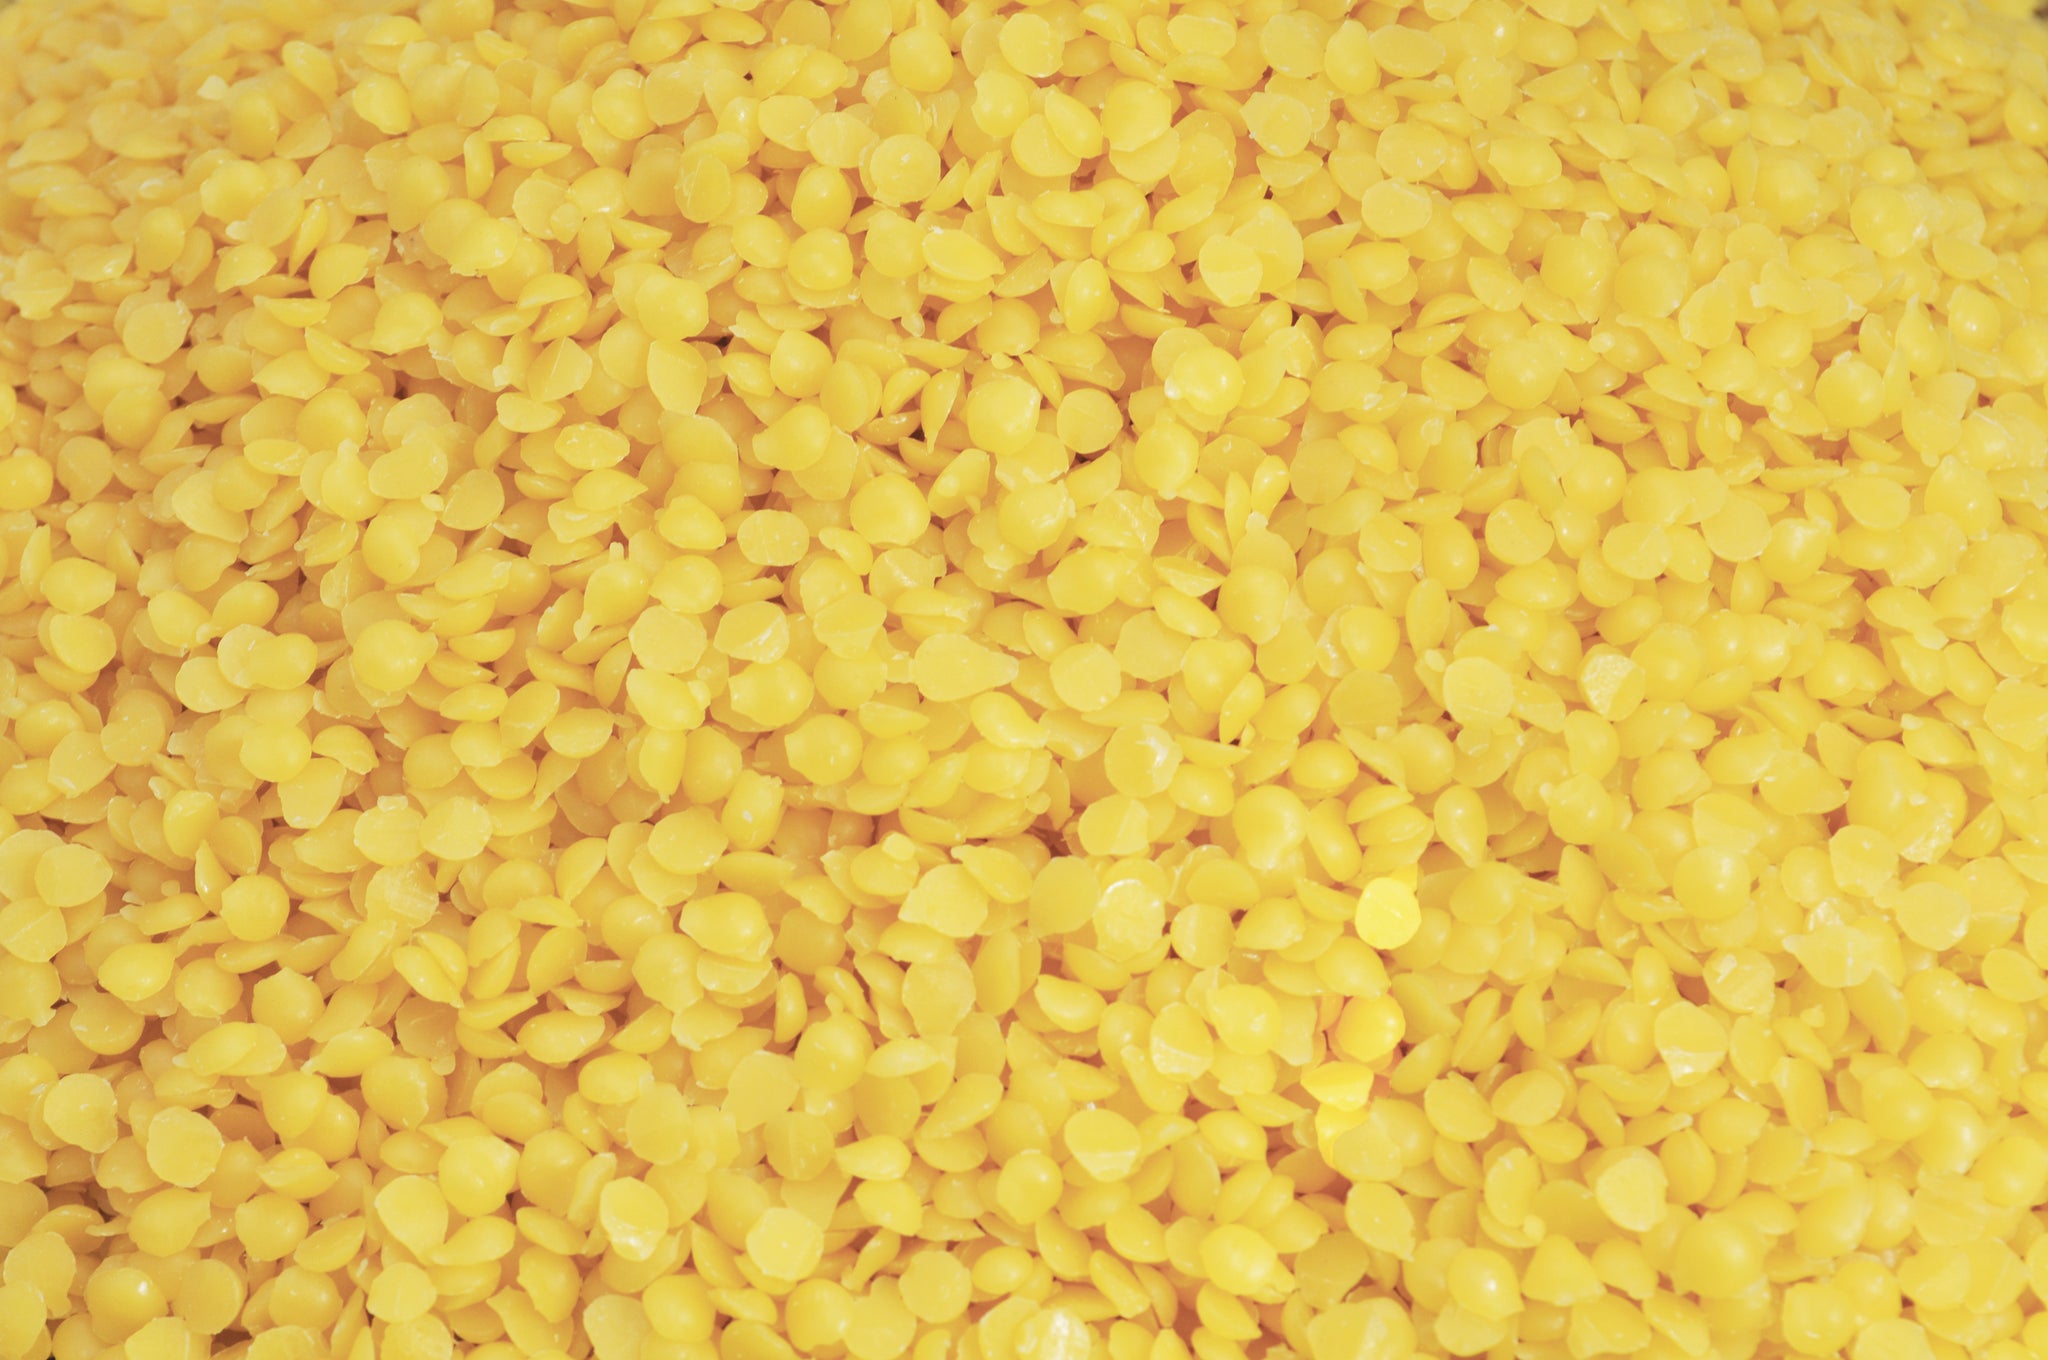 Organic Beeswax Pellets 2 lb (1 lb in Each Bag) Yellow, Pure